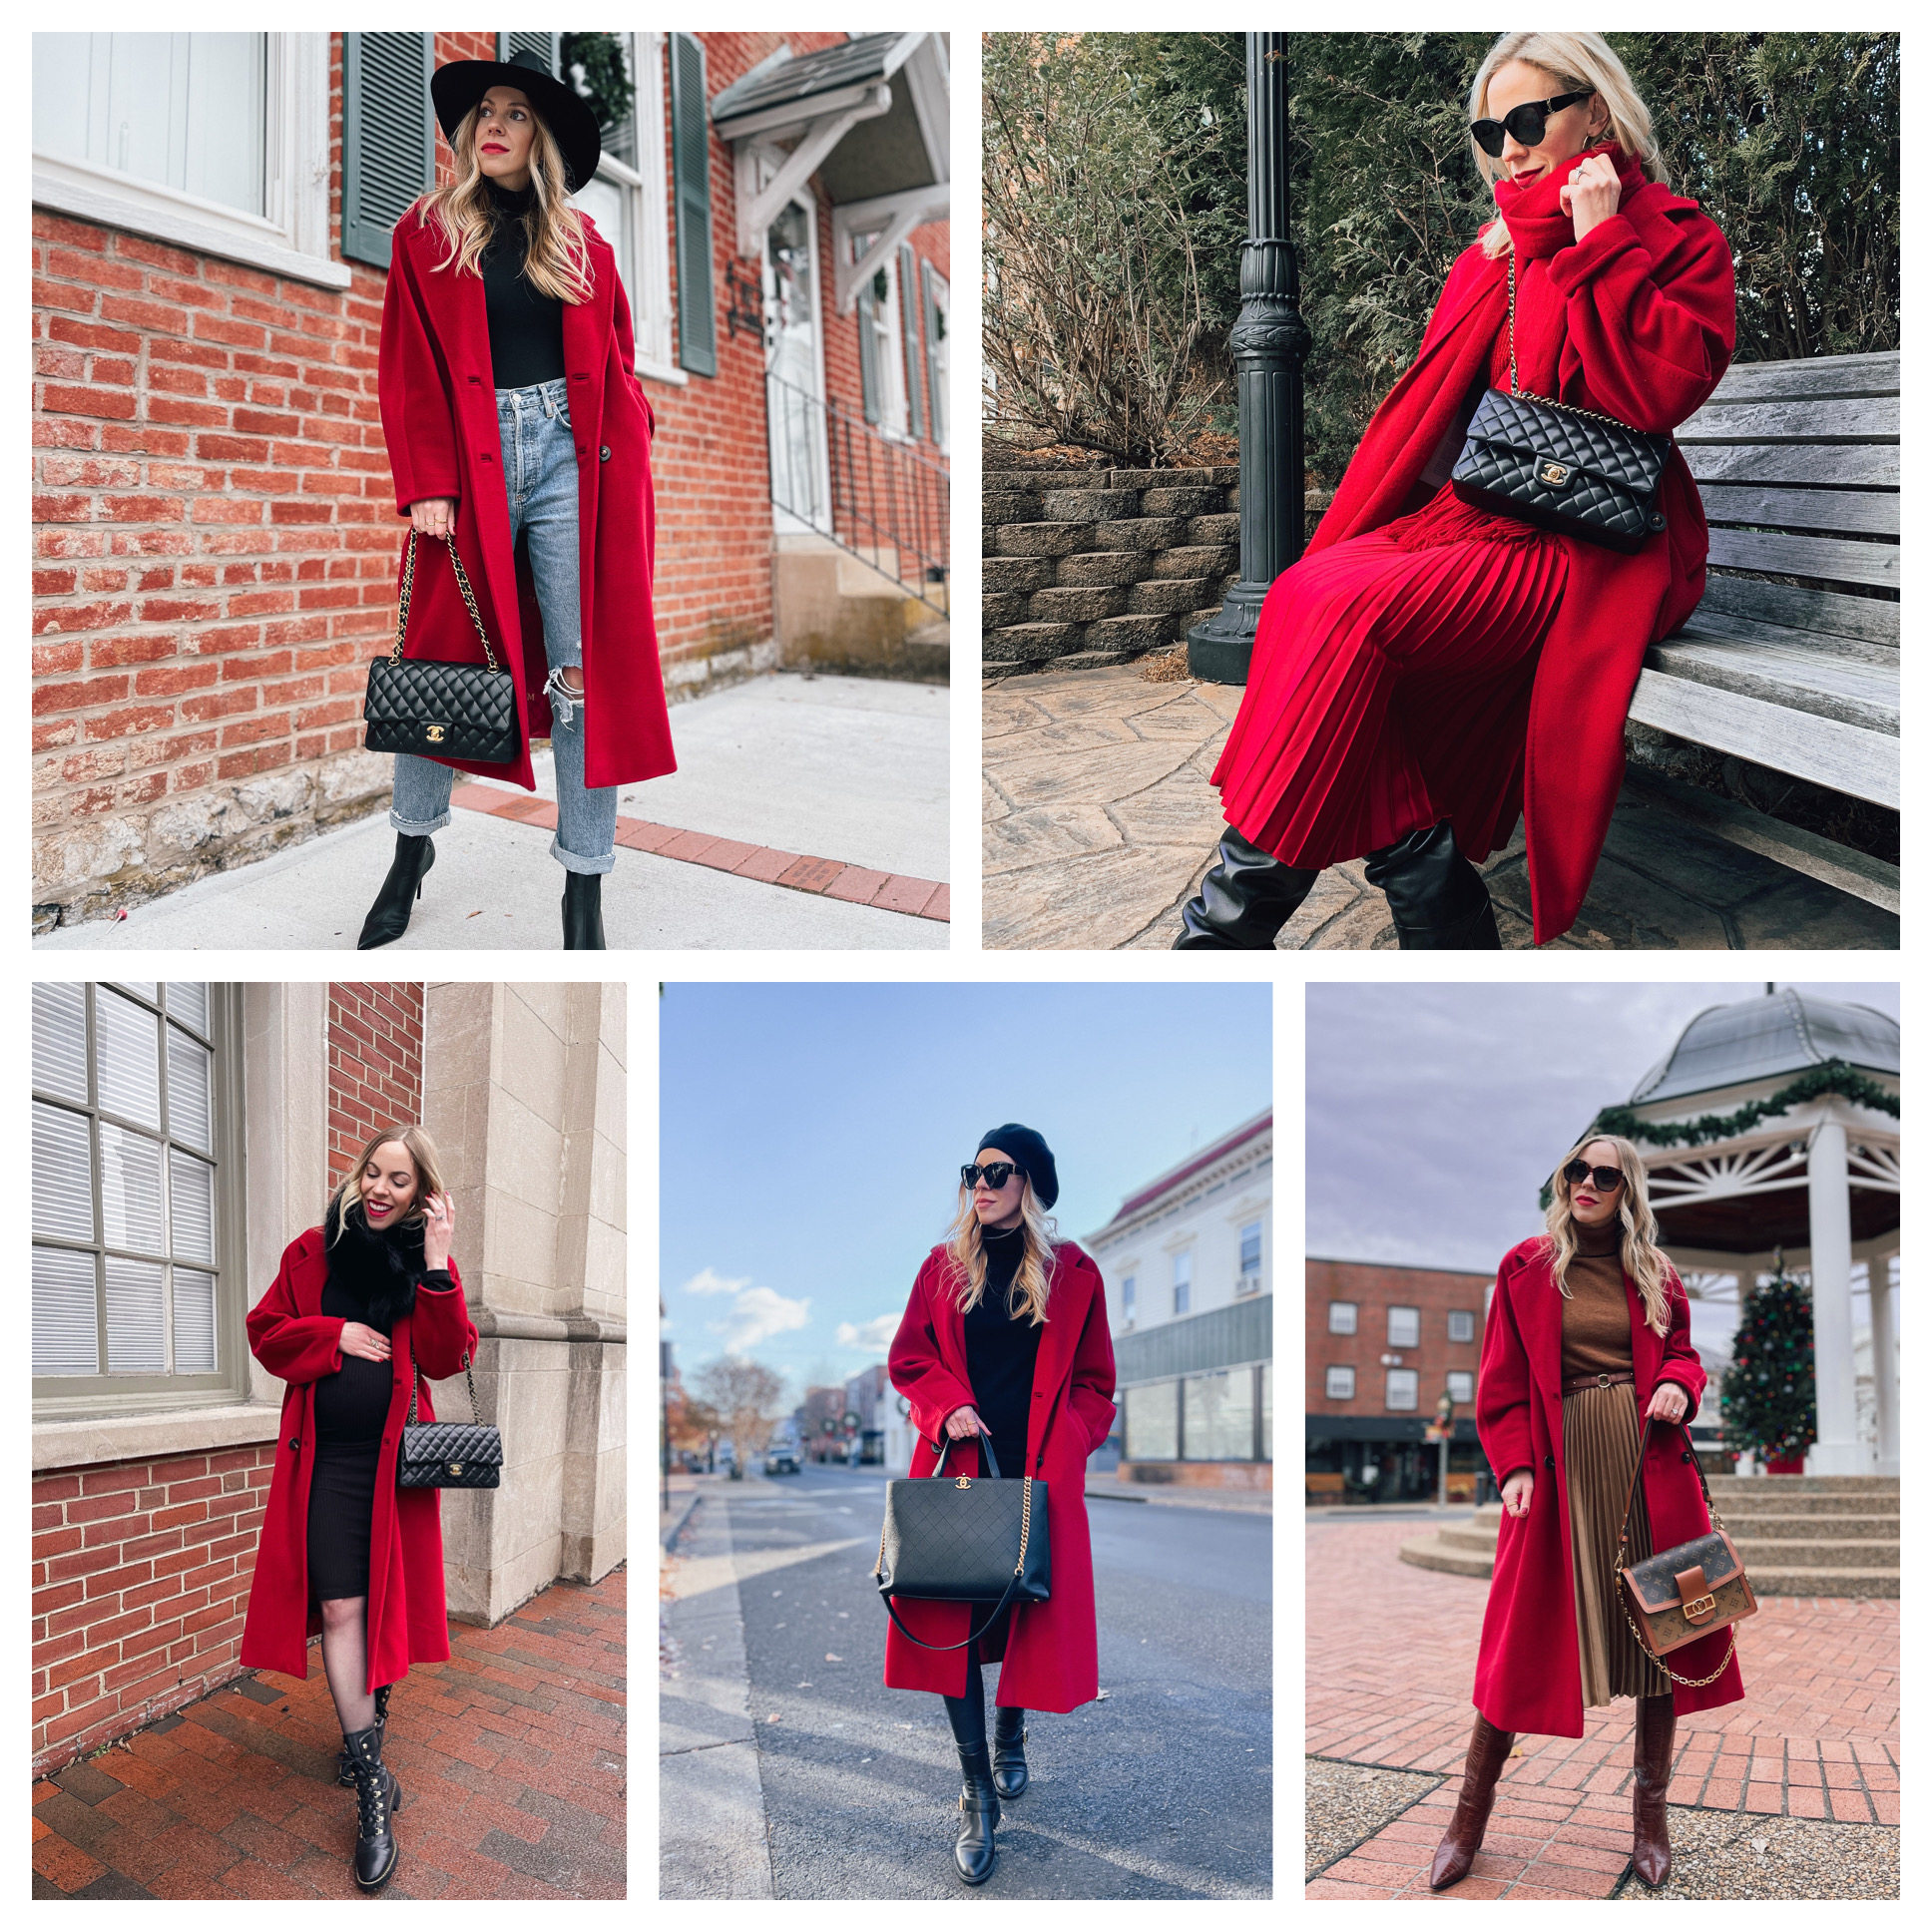 Meagan's Moda red coat outfit inspiration for winter and the holidays